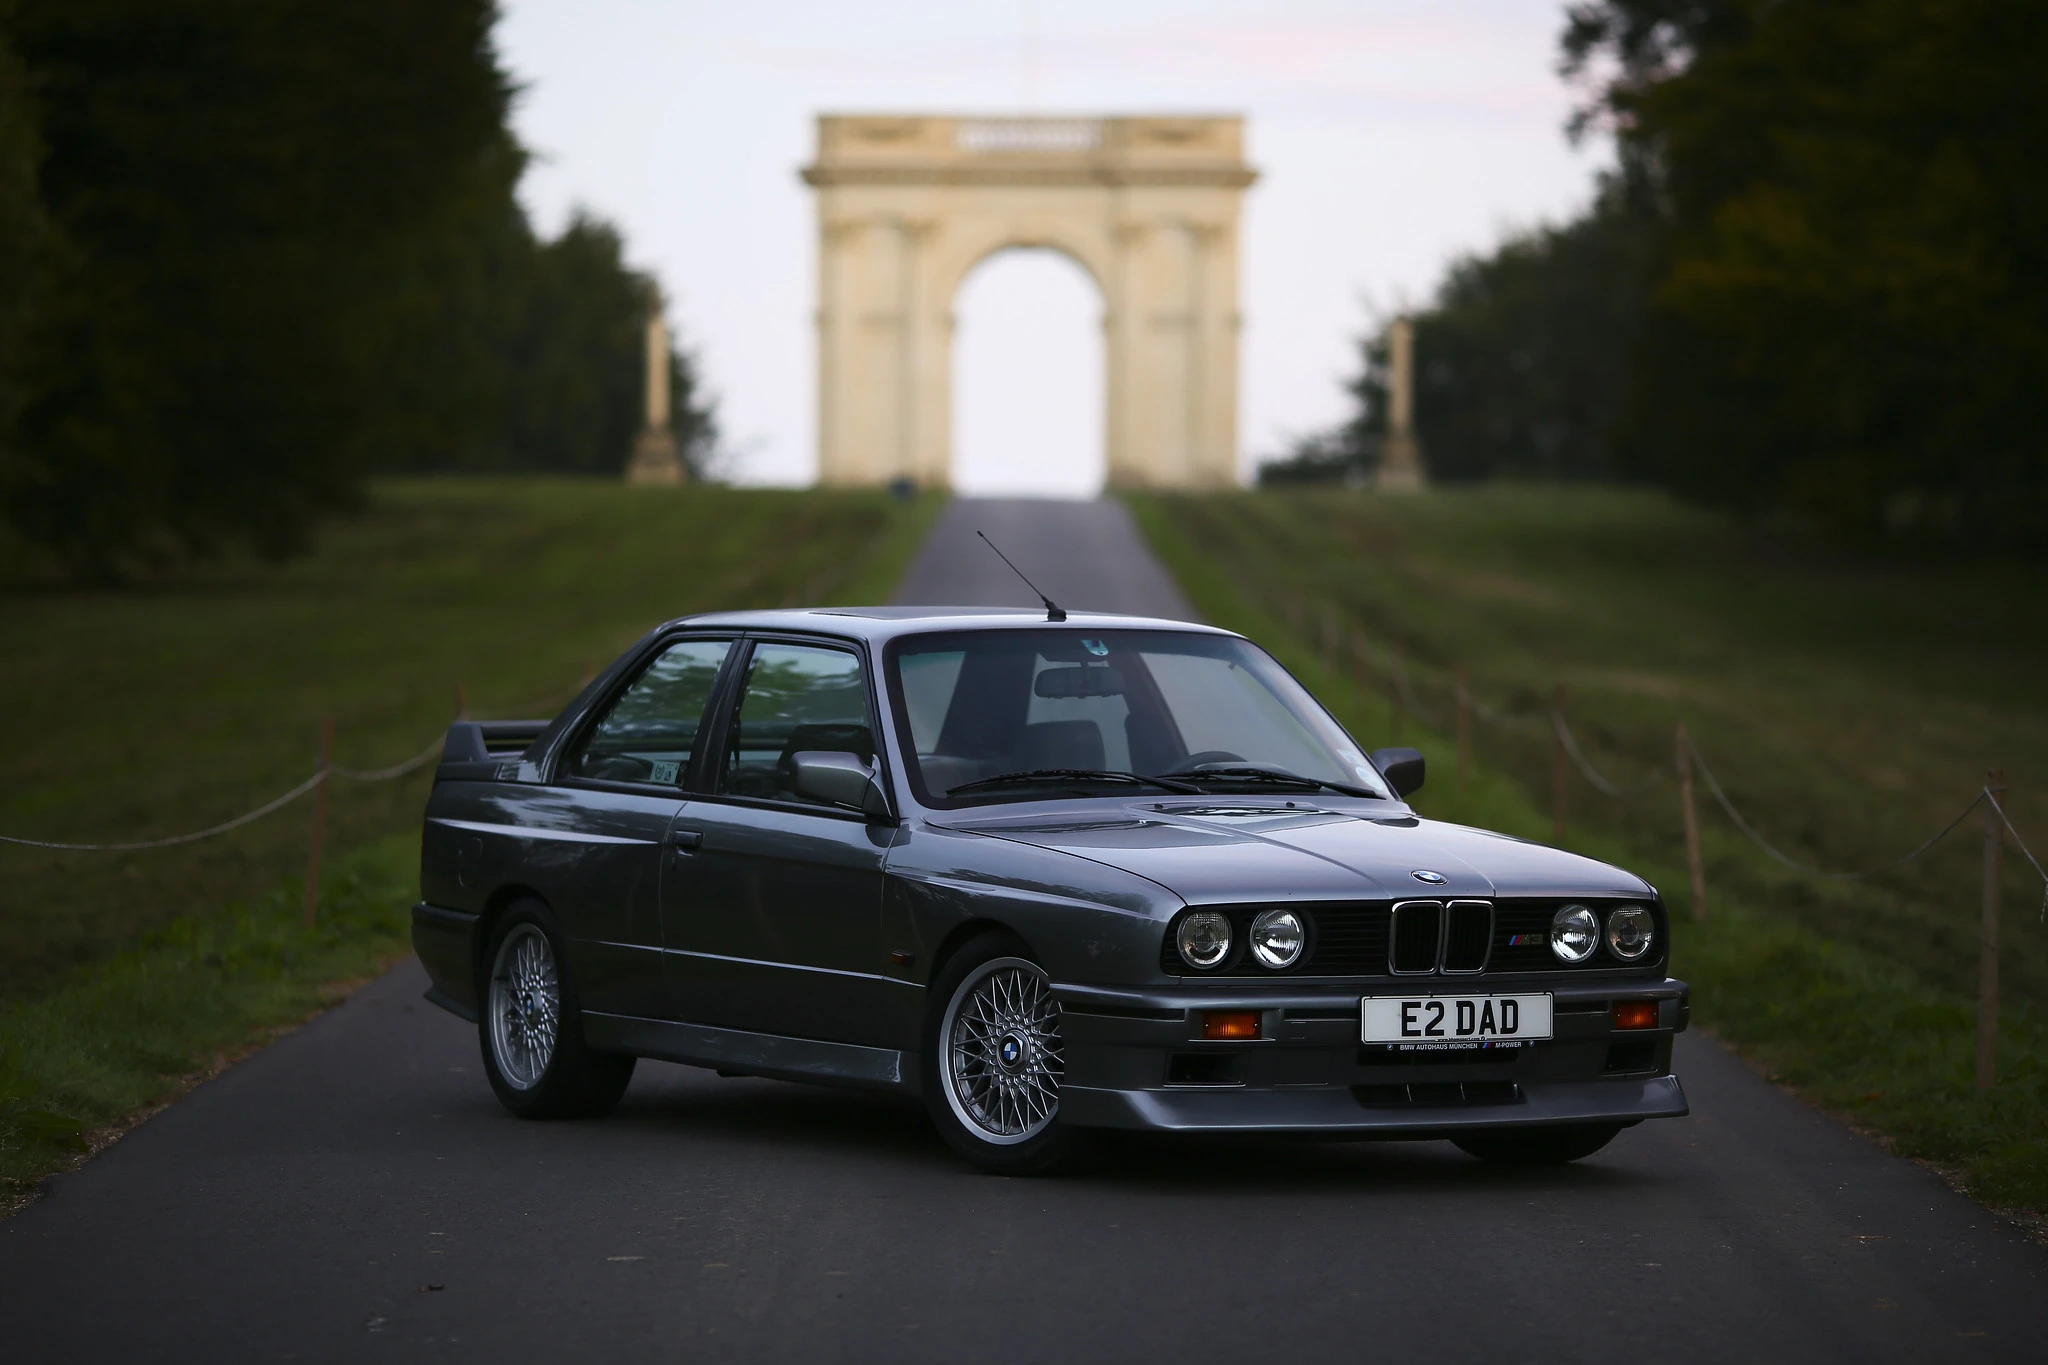 Gray E30 M3 on a country road